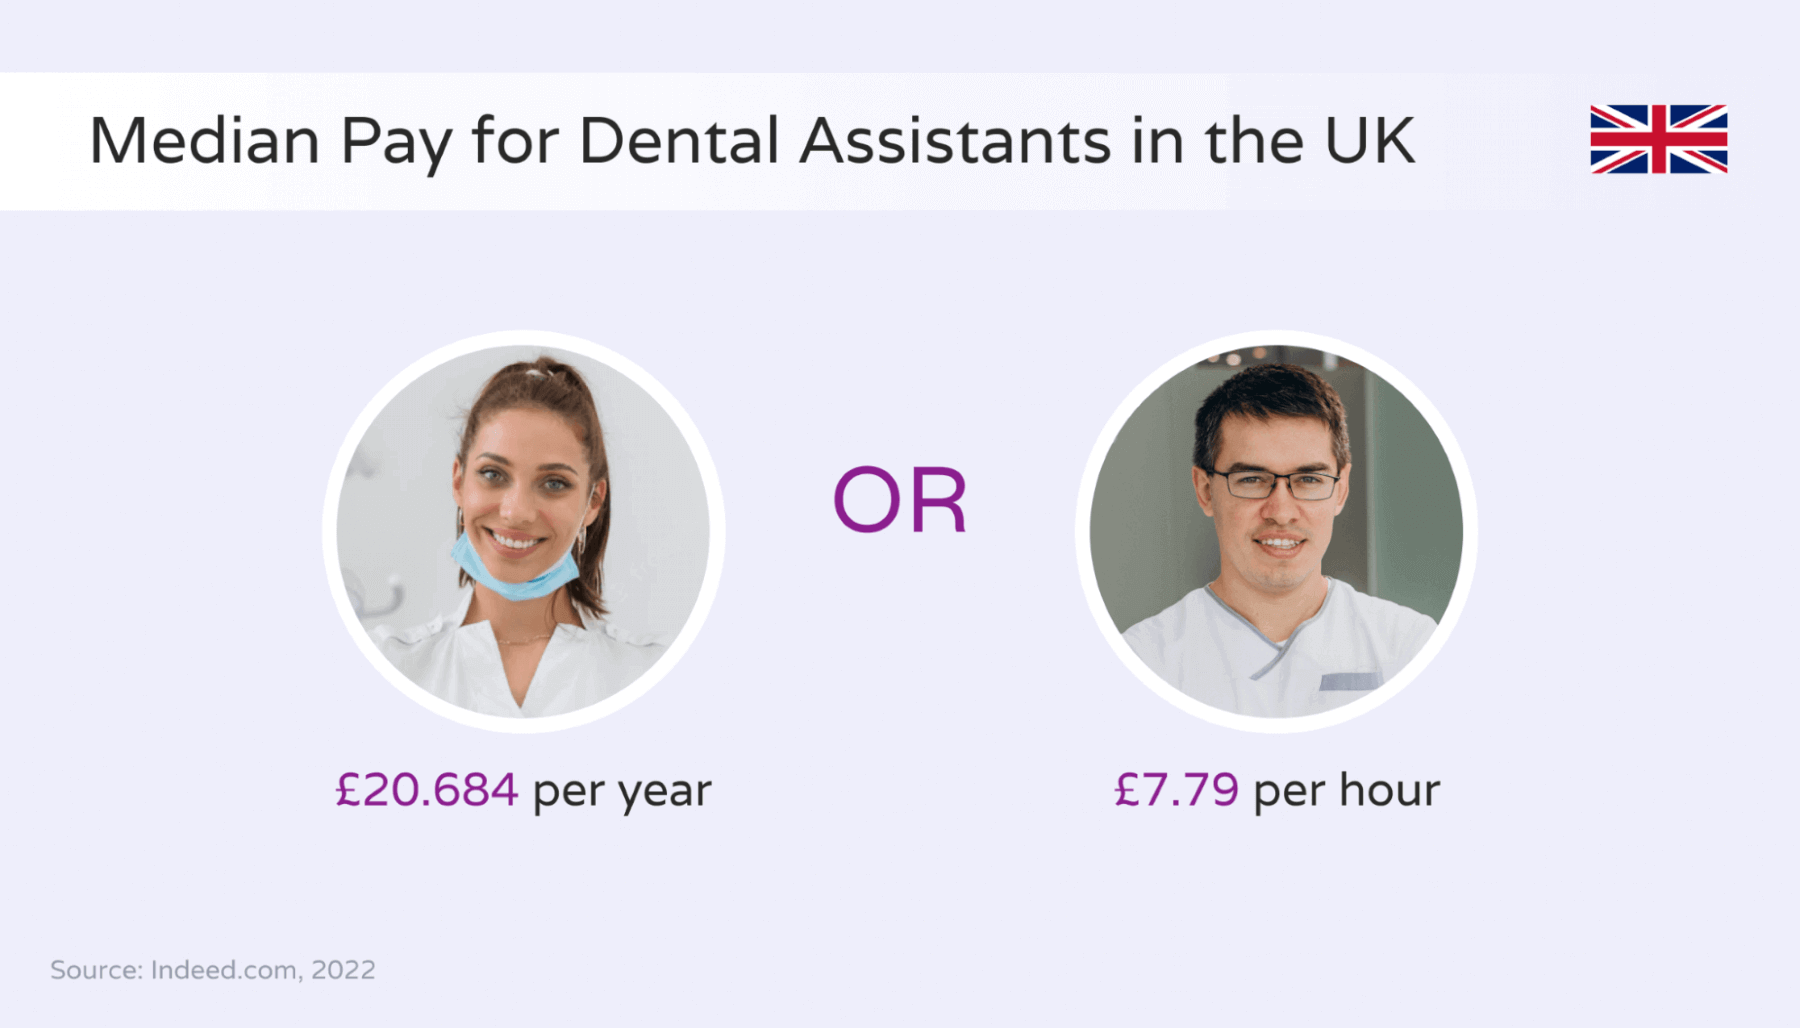 illustration showing the median salary and hourly rate of dental assistants in the UK